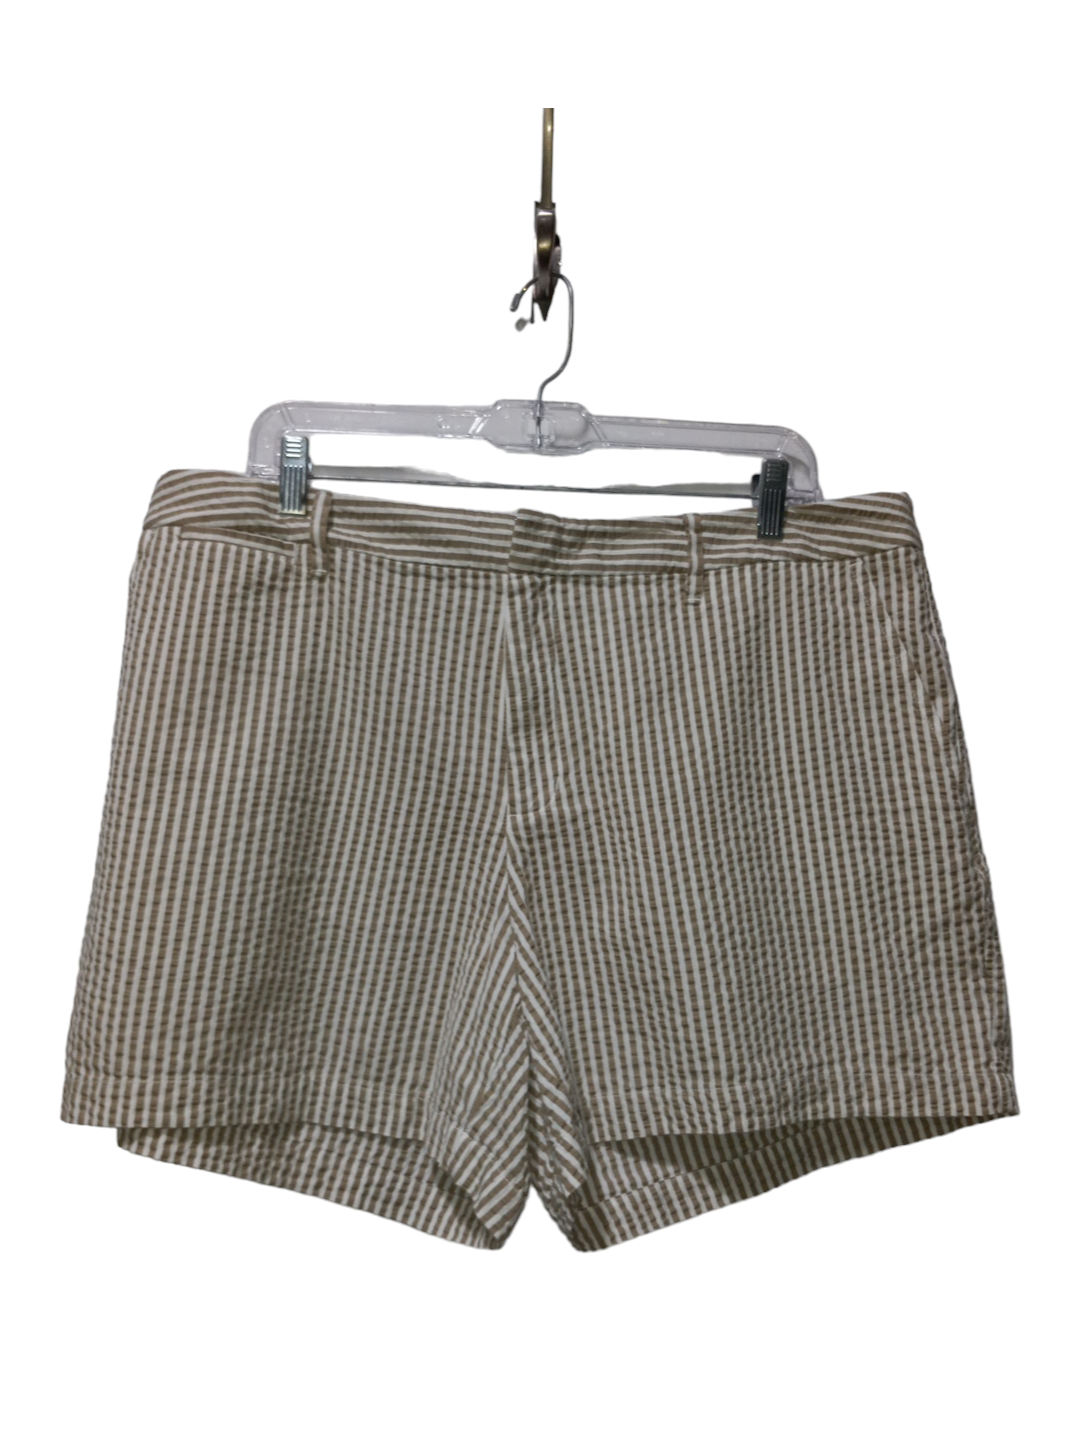 Shorts By A New Day  Size: 6